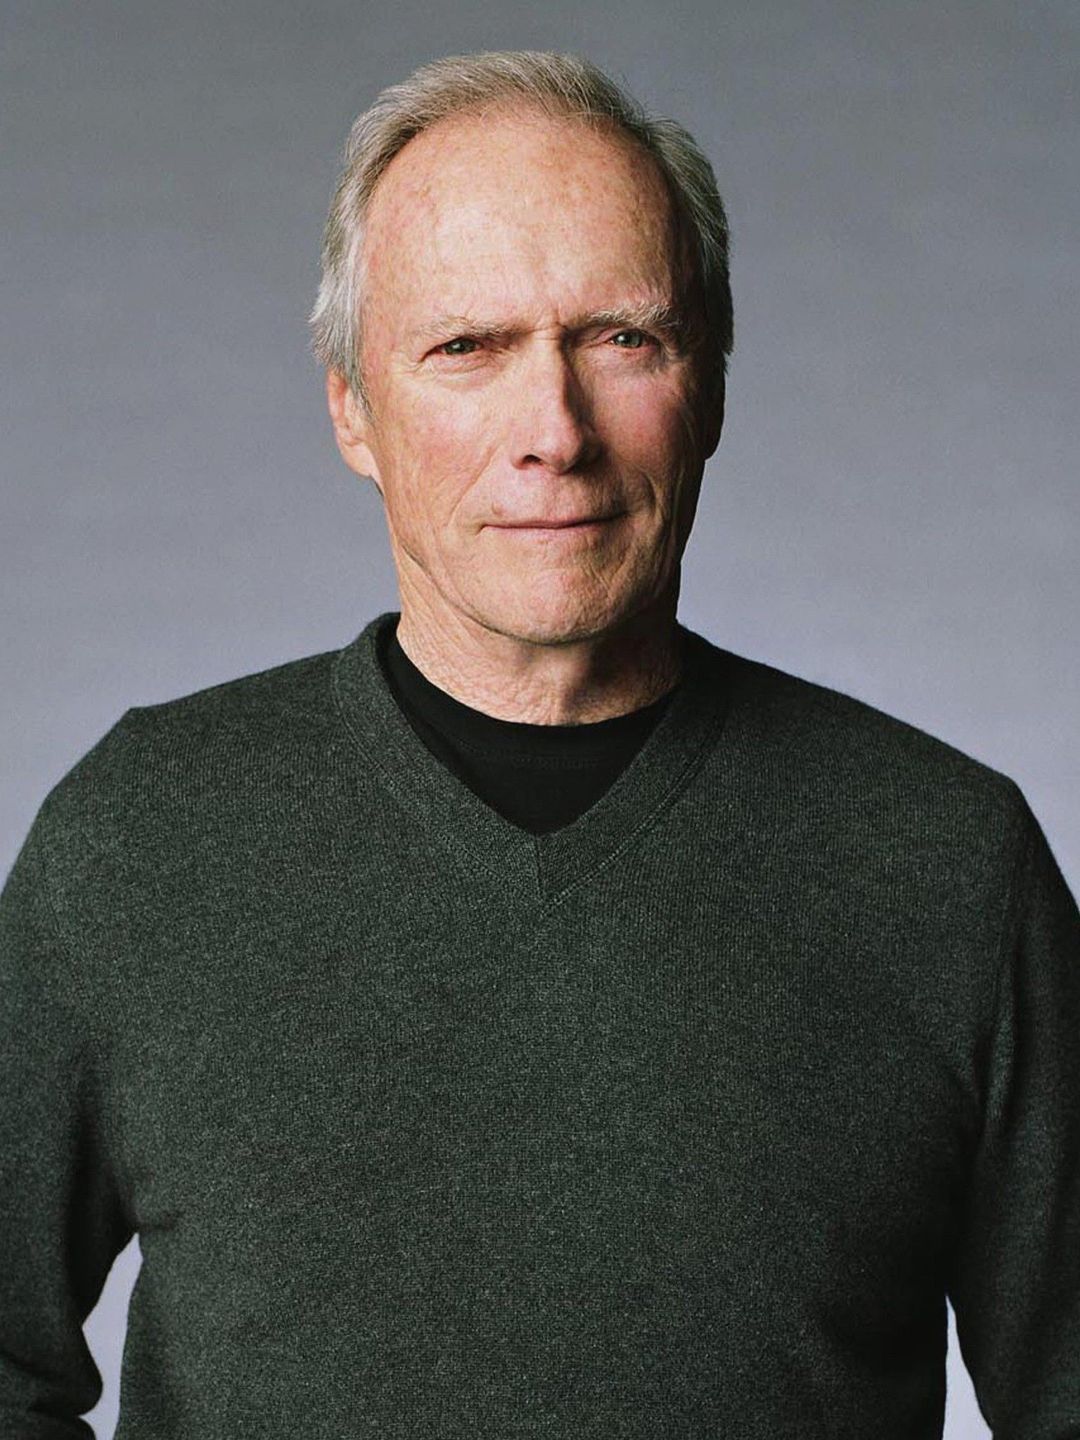 Clint Eastwood personal life